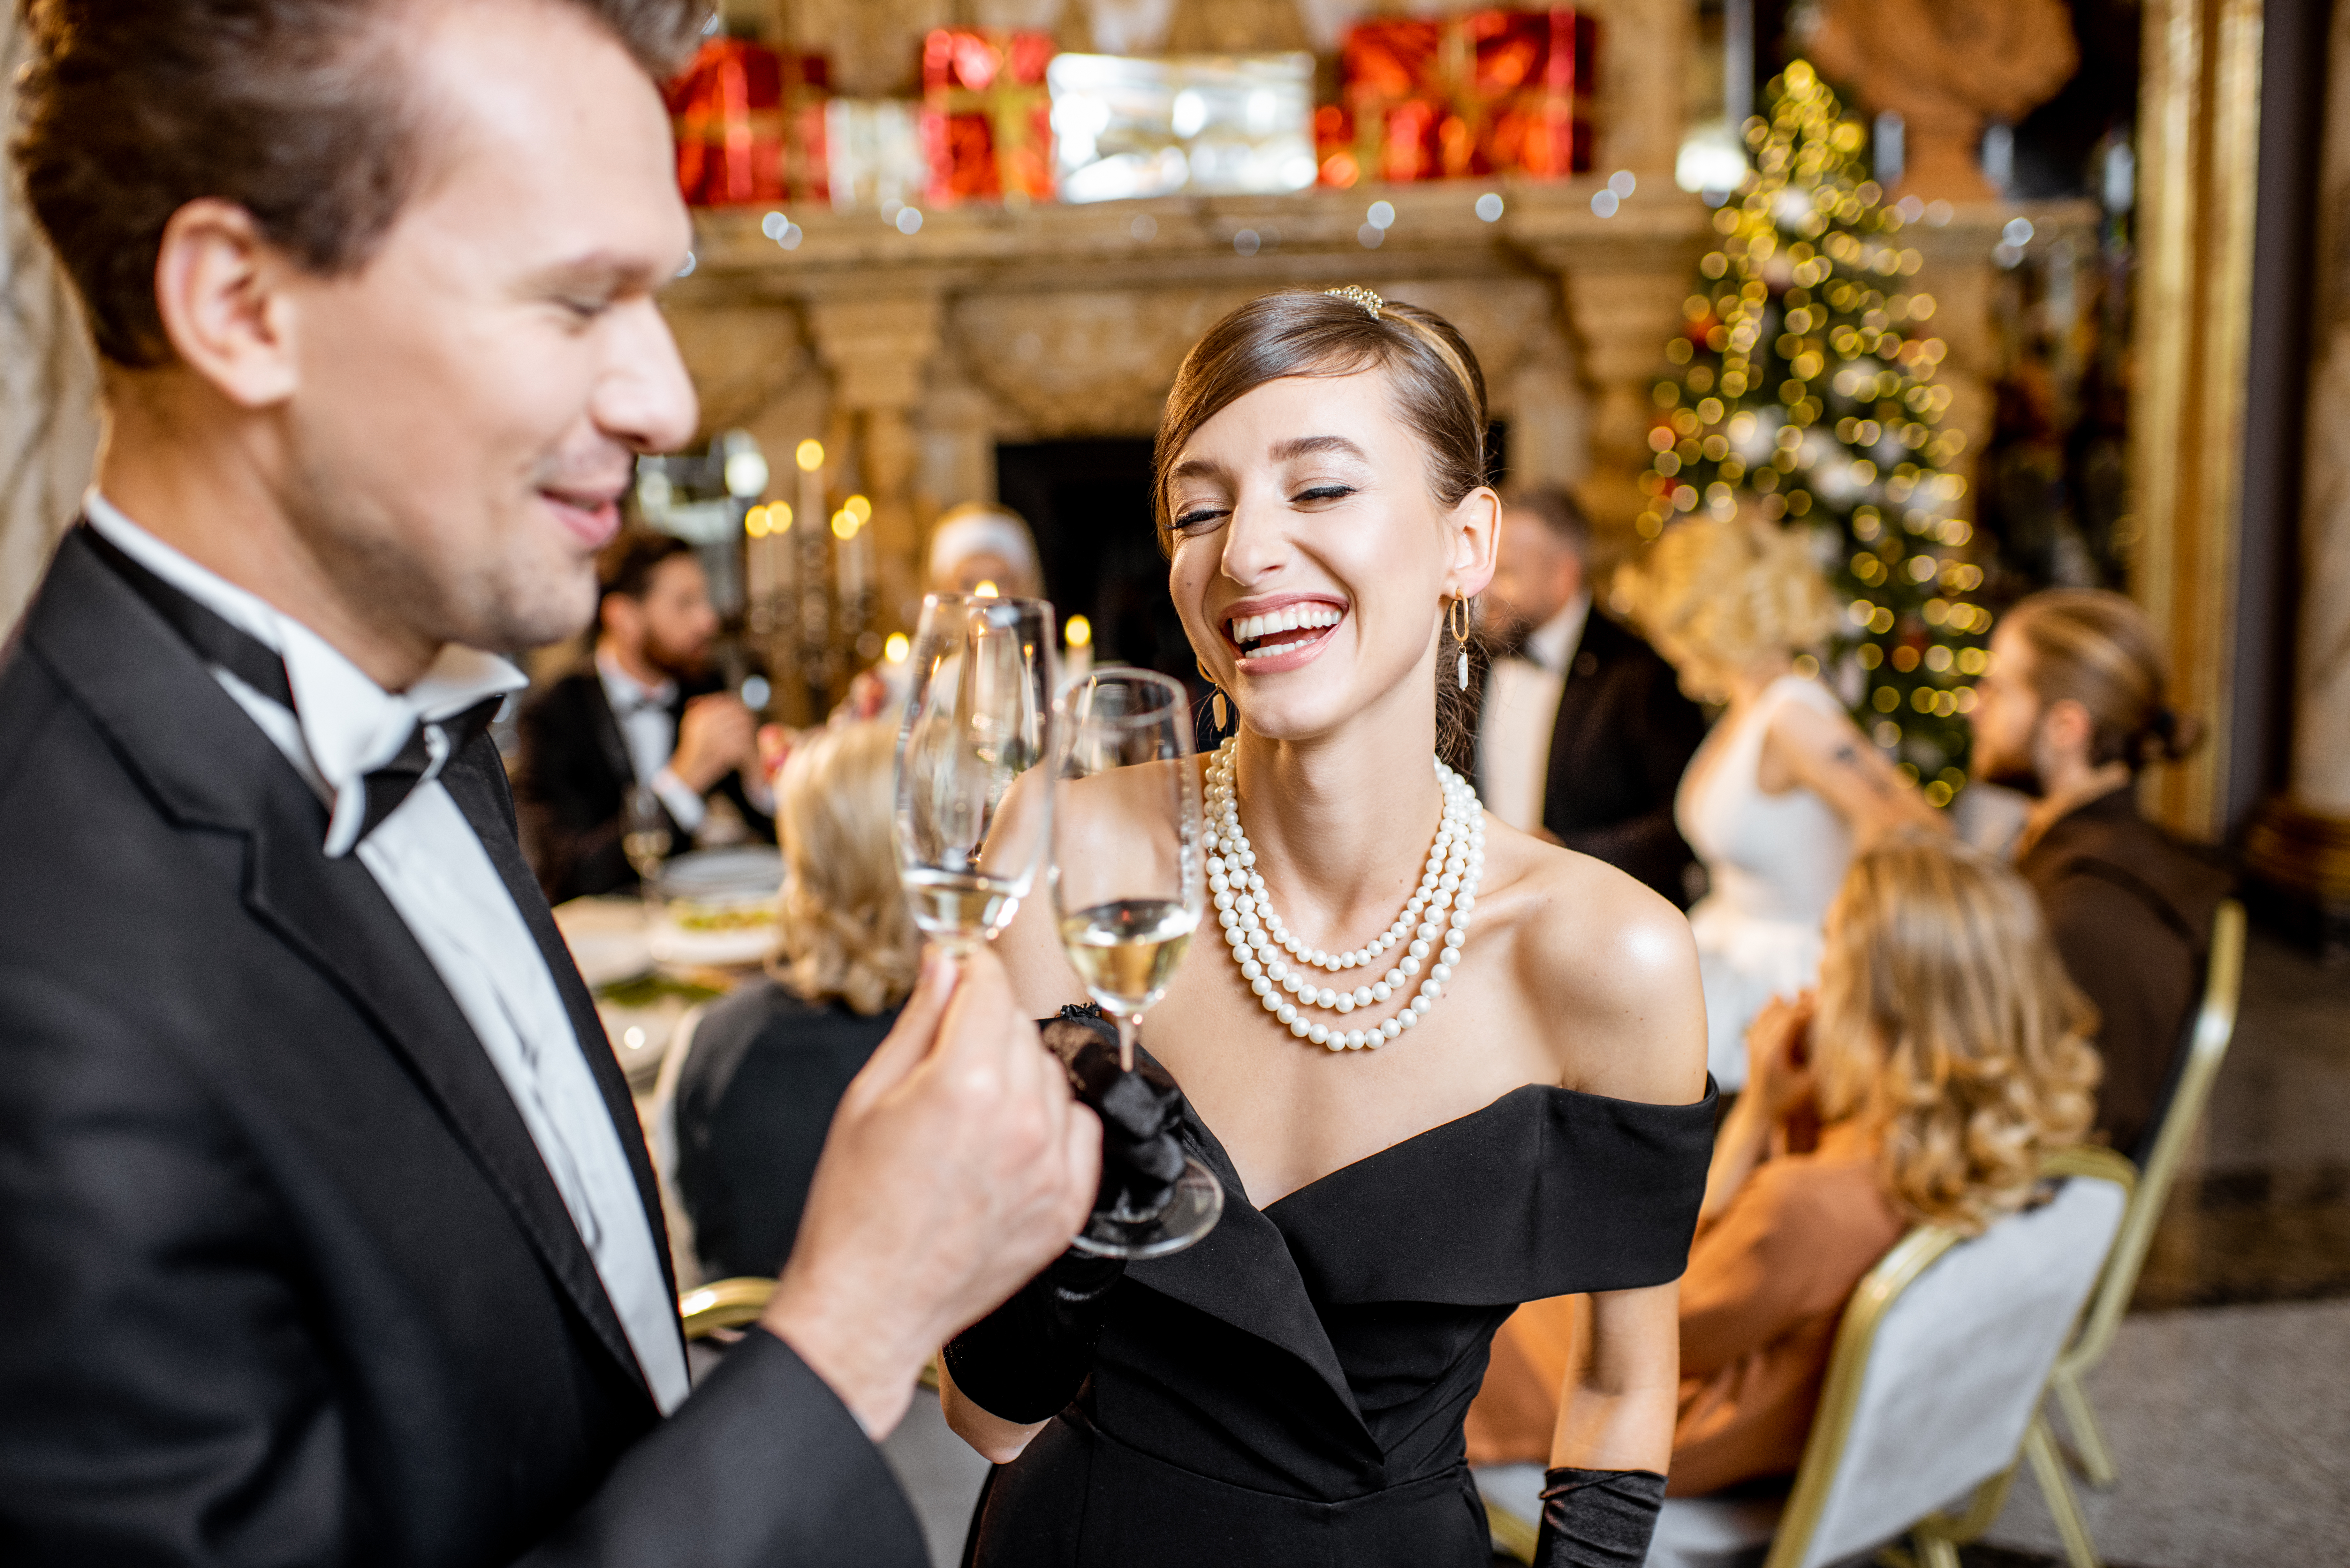 How to Host an Unforgettable Black Tie Party